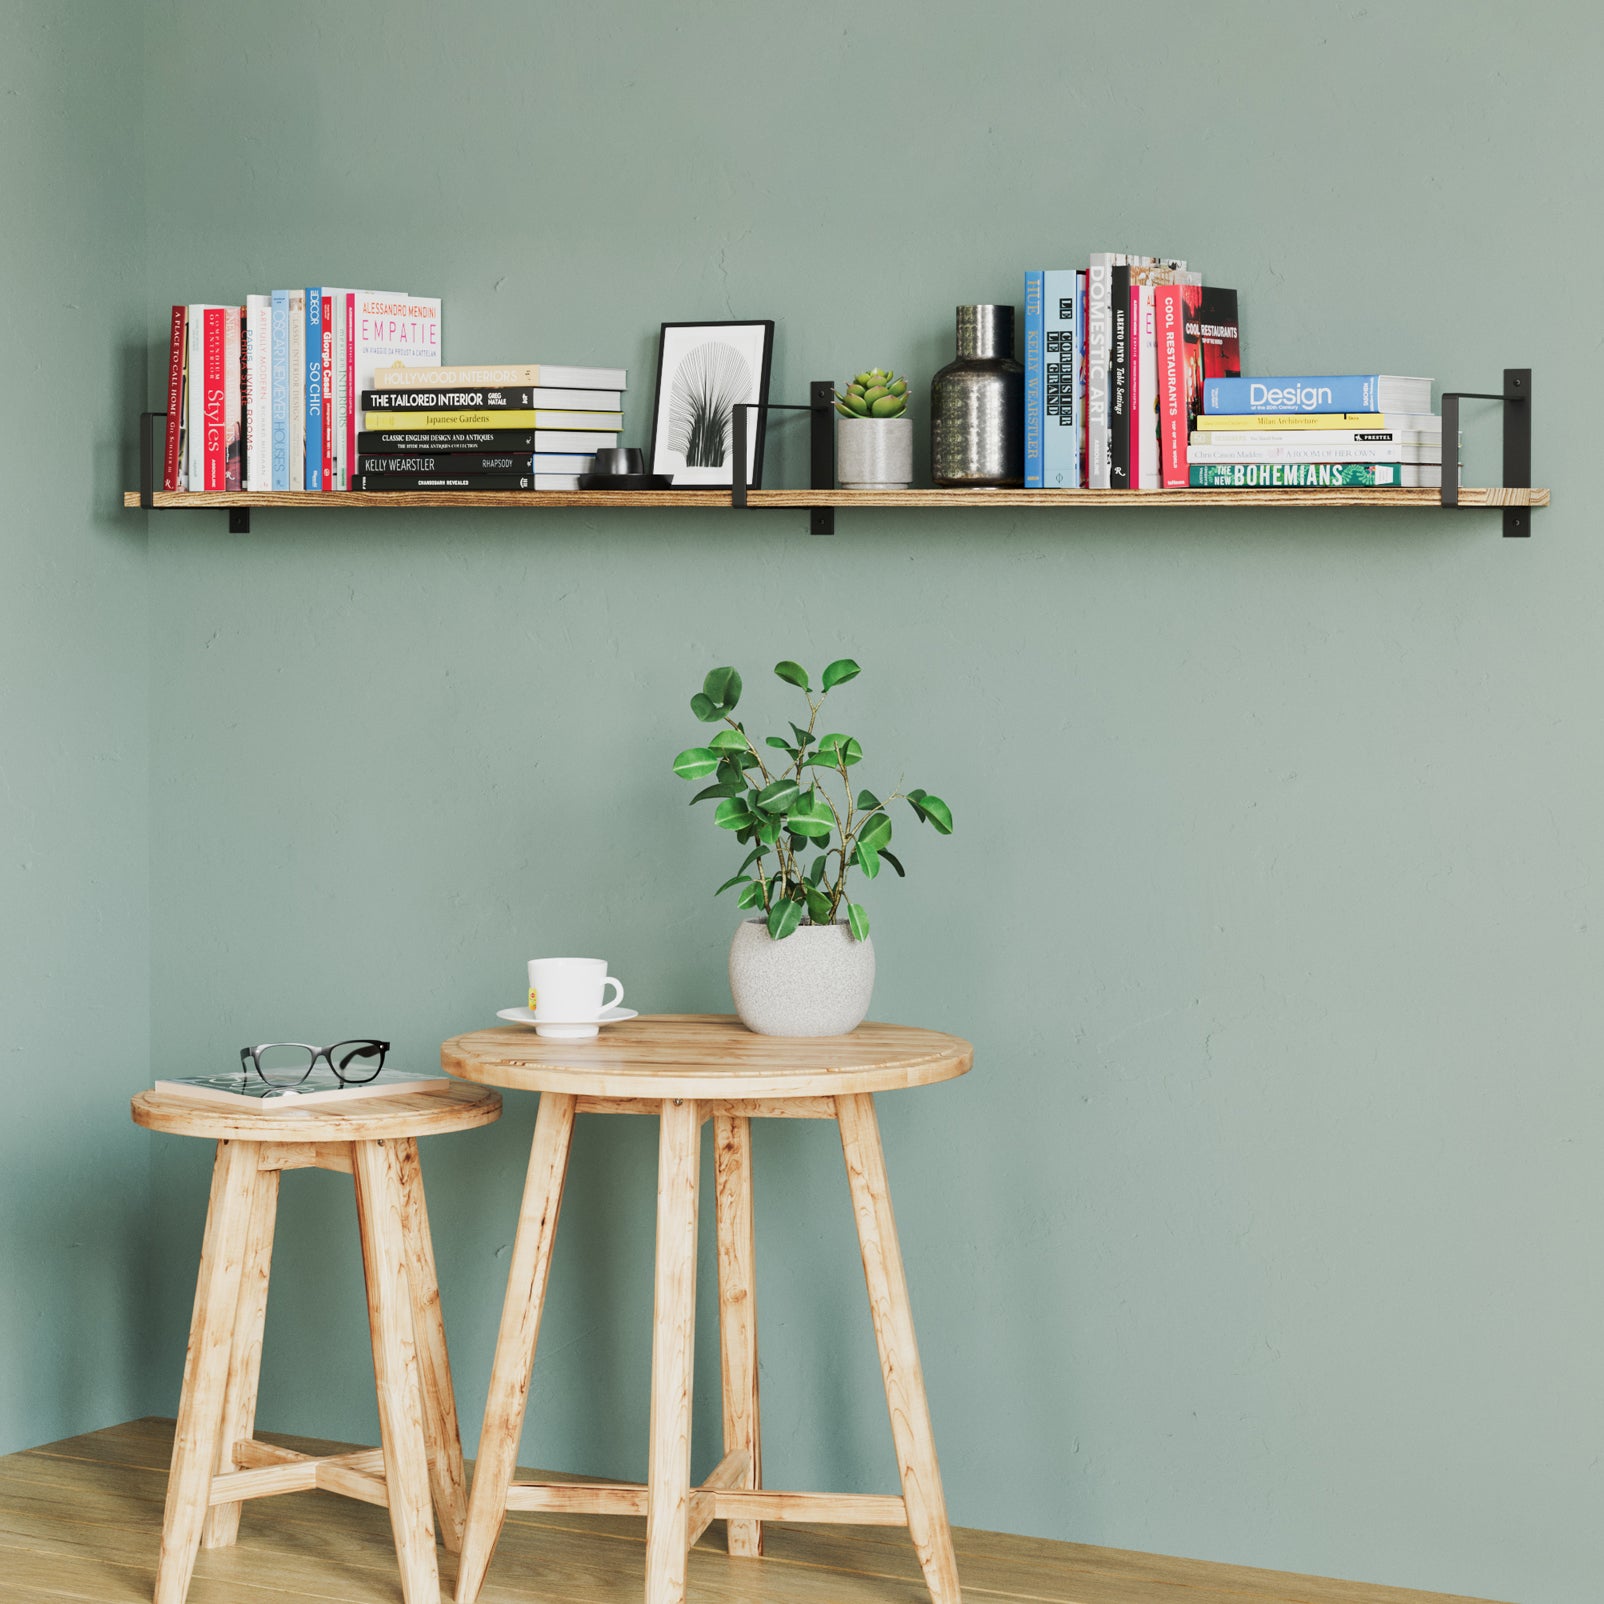 Casual reading nook with wall bookshelf holding a diverse collection of books and small plants.